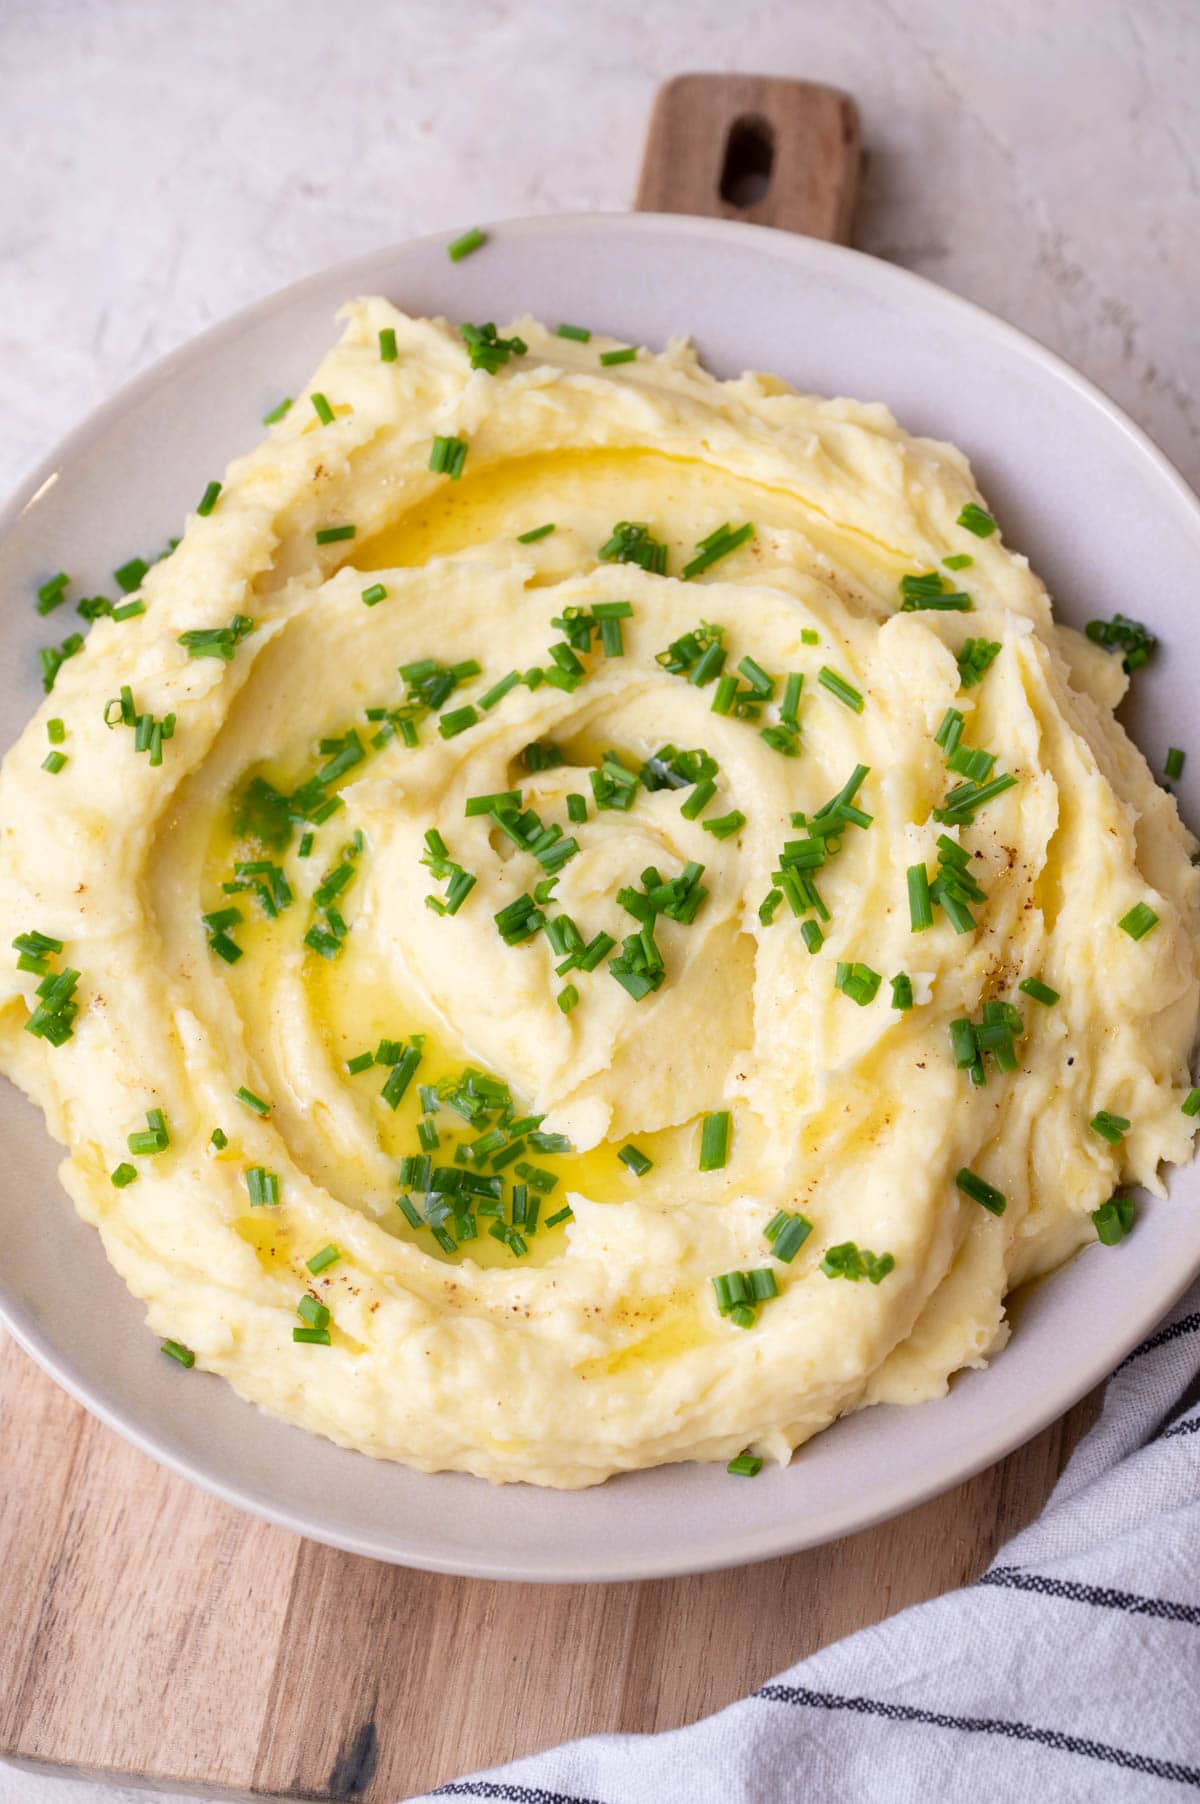 Cream cheese mashed potatoes in a beige bowl topped with chives.